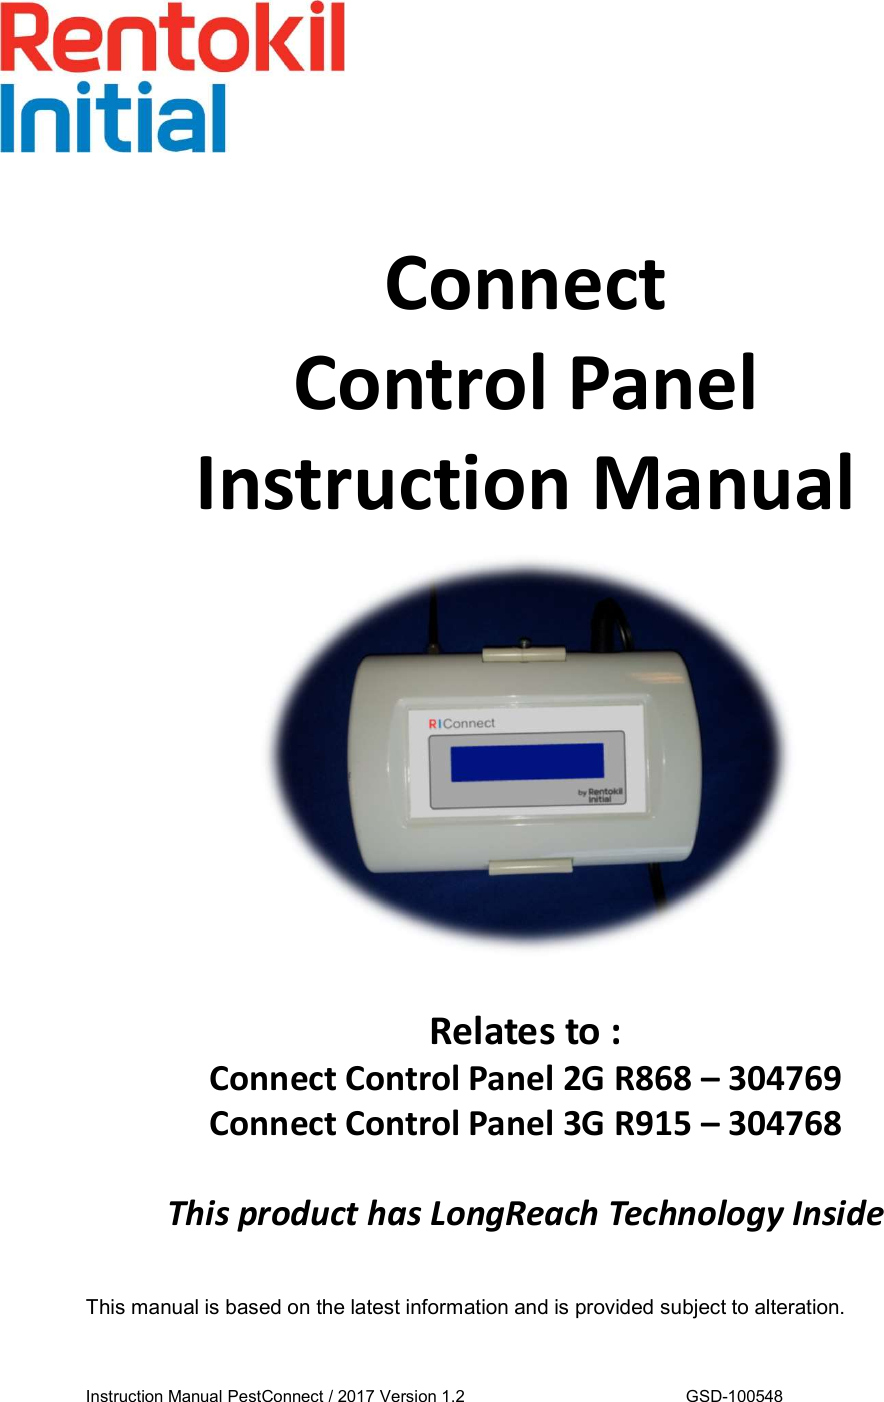 ConnectControl PanelInstruction ManualThis manual is based on the latest information and is provided subject to alteration.Instruction Manual PestConnect / 2017 Version 1.2 GSD-100548Relates to :Connect Control Panel 2G R868 – 304769Connect Control Panel 3G R915 – 304768This product has LongReach Technology Inside